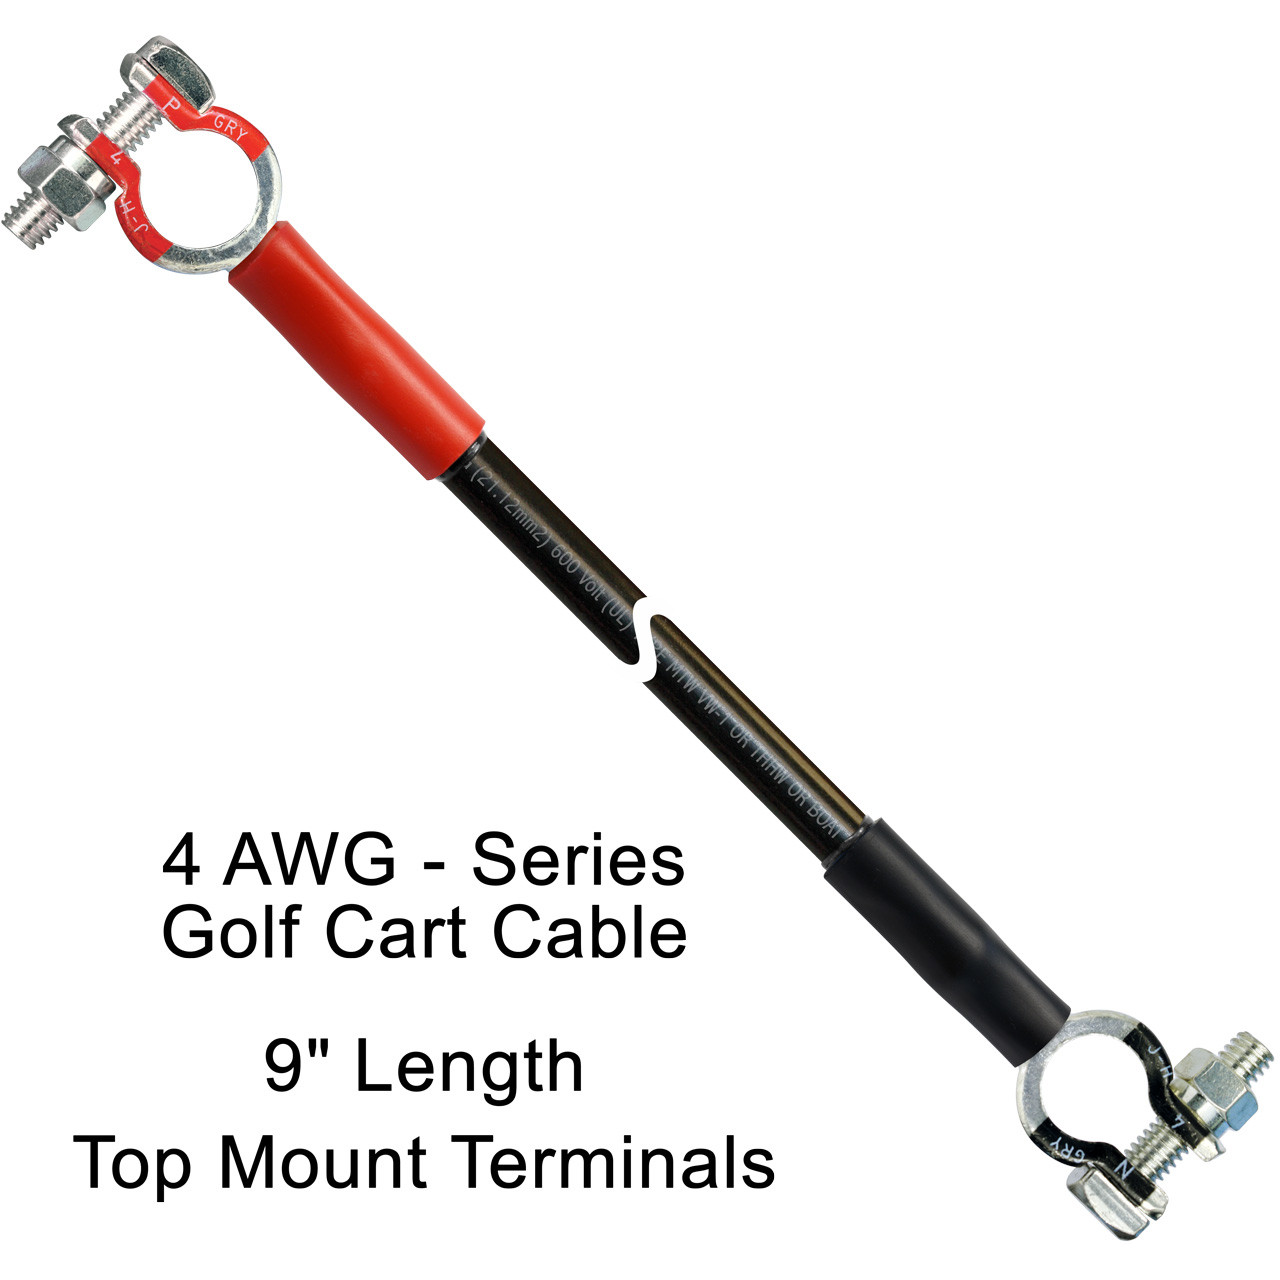 9 inch replacement Golf Cart Cable built with 4 AWG THHW 100% copper Flexible Fine Strand Battery Cable Wire, series positive to negative, Ecomax top mount battery terminals and dual wall adhesive lined heat shrink